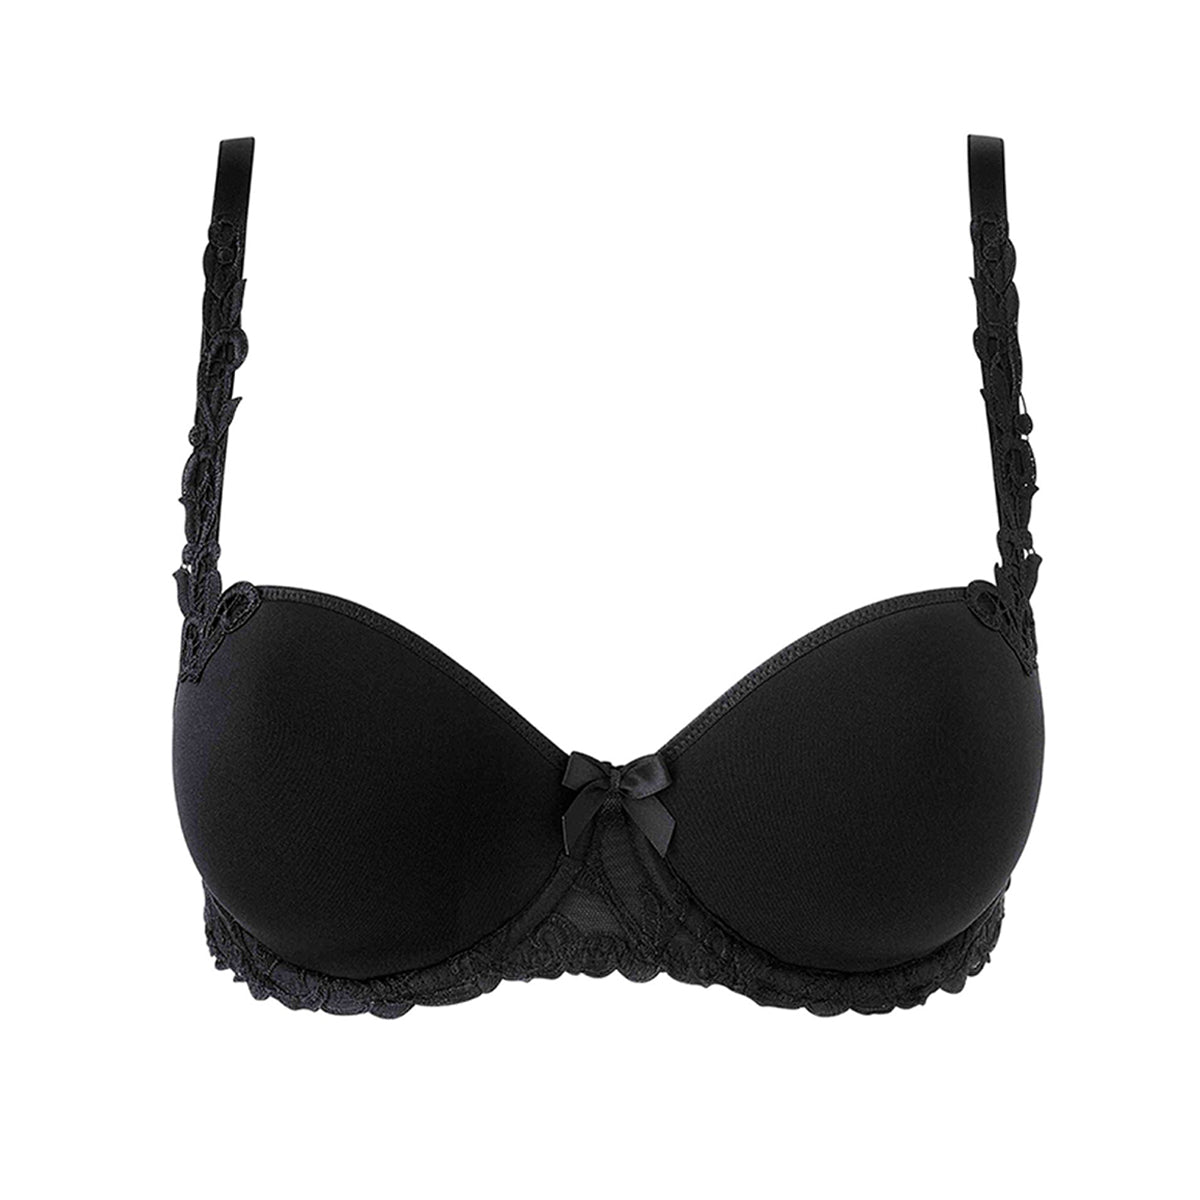 Sexy Lace Back 32f Bra Size With Front Closure And Y Line Straps Big Cup BH  Underwear Lingerie In Sizes 32 44 From Yigu110, $18